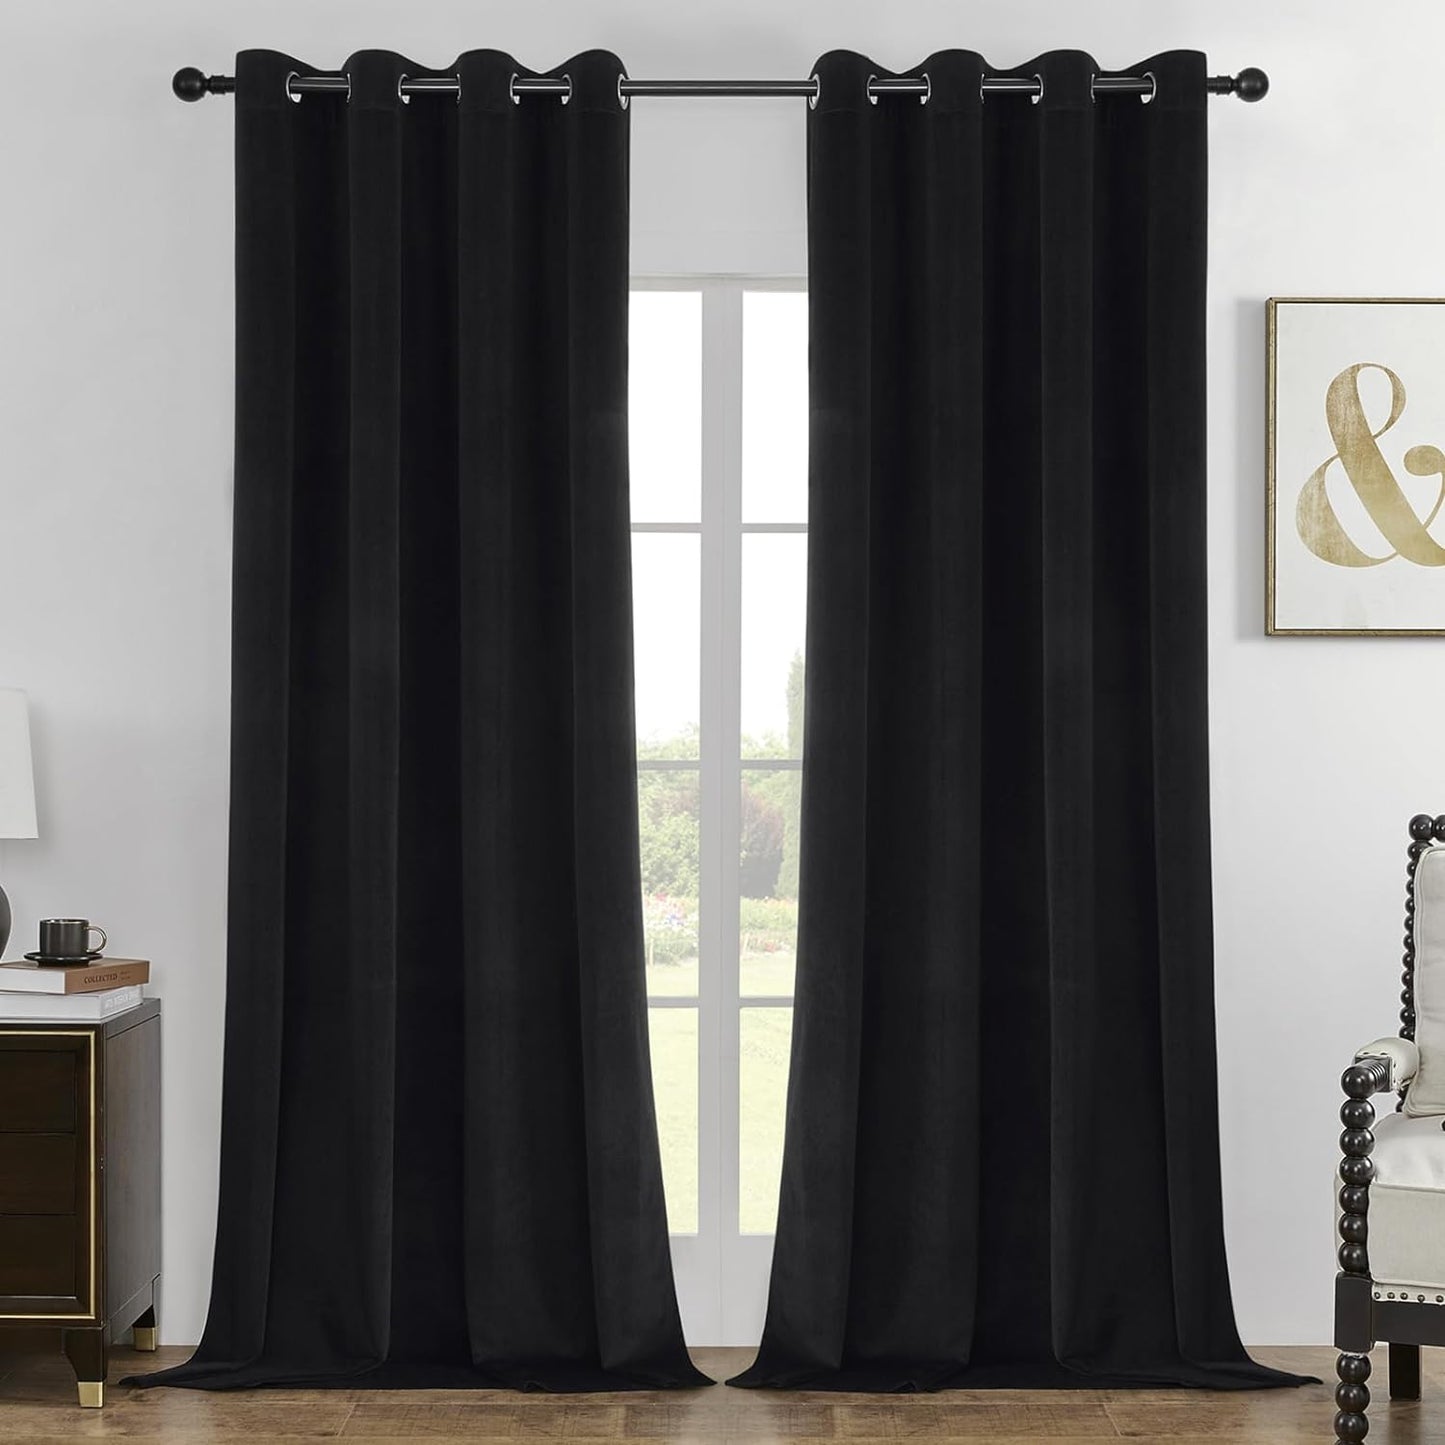 Joydeco Navy Blue 100% Blackout Curtains 90 Inch Curtains 2 Panels Set, Black Out Curtain for Bedroom, Grommet Heavy Luxury Thermal Insulated Velvet Curtains for Living Room Home Theater, 52W X 90L  Joydeco Black 52W X 72L Inch X 2 Panels 